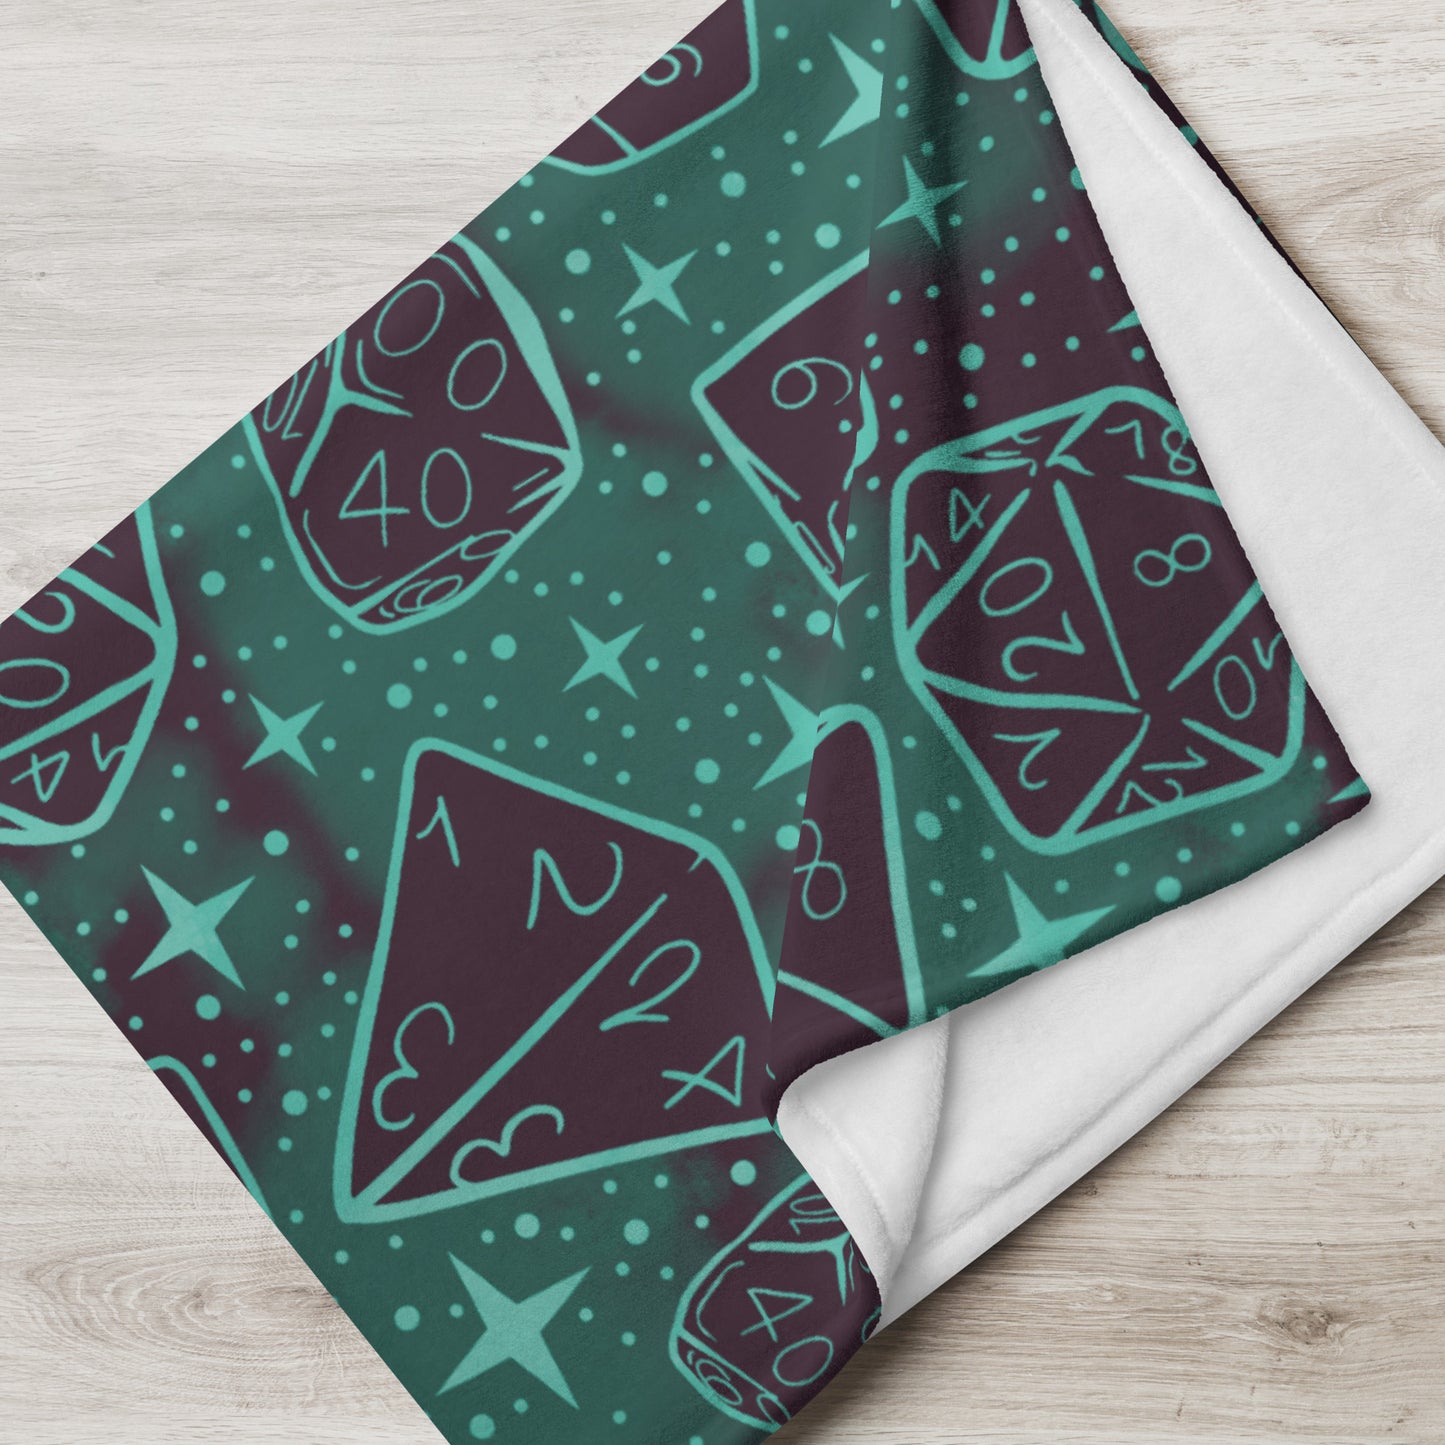 Dice Pattern, Dusk Version Throw Blanket | Dungeons and Dragons